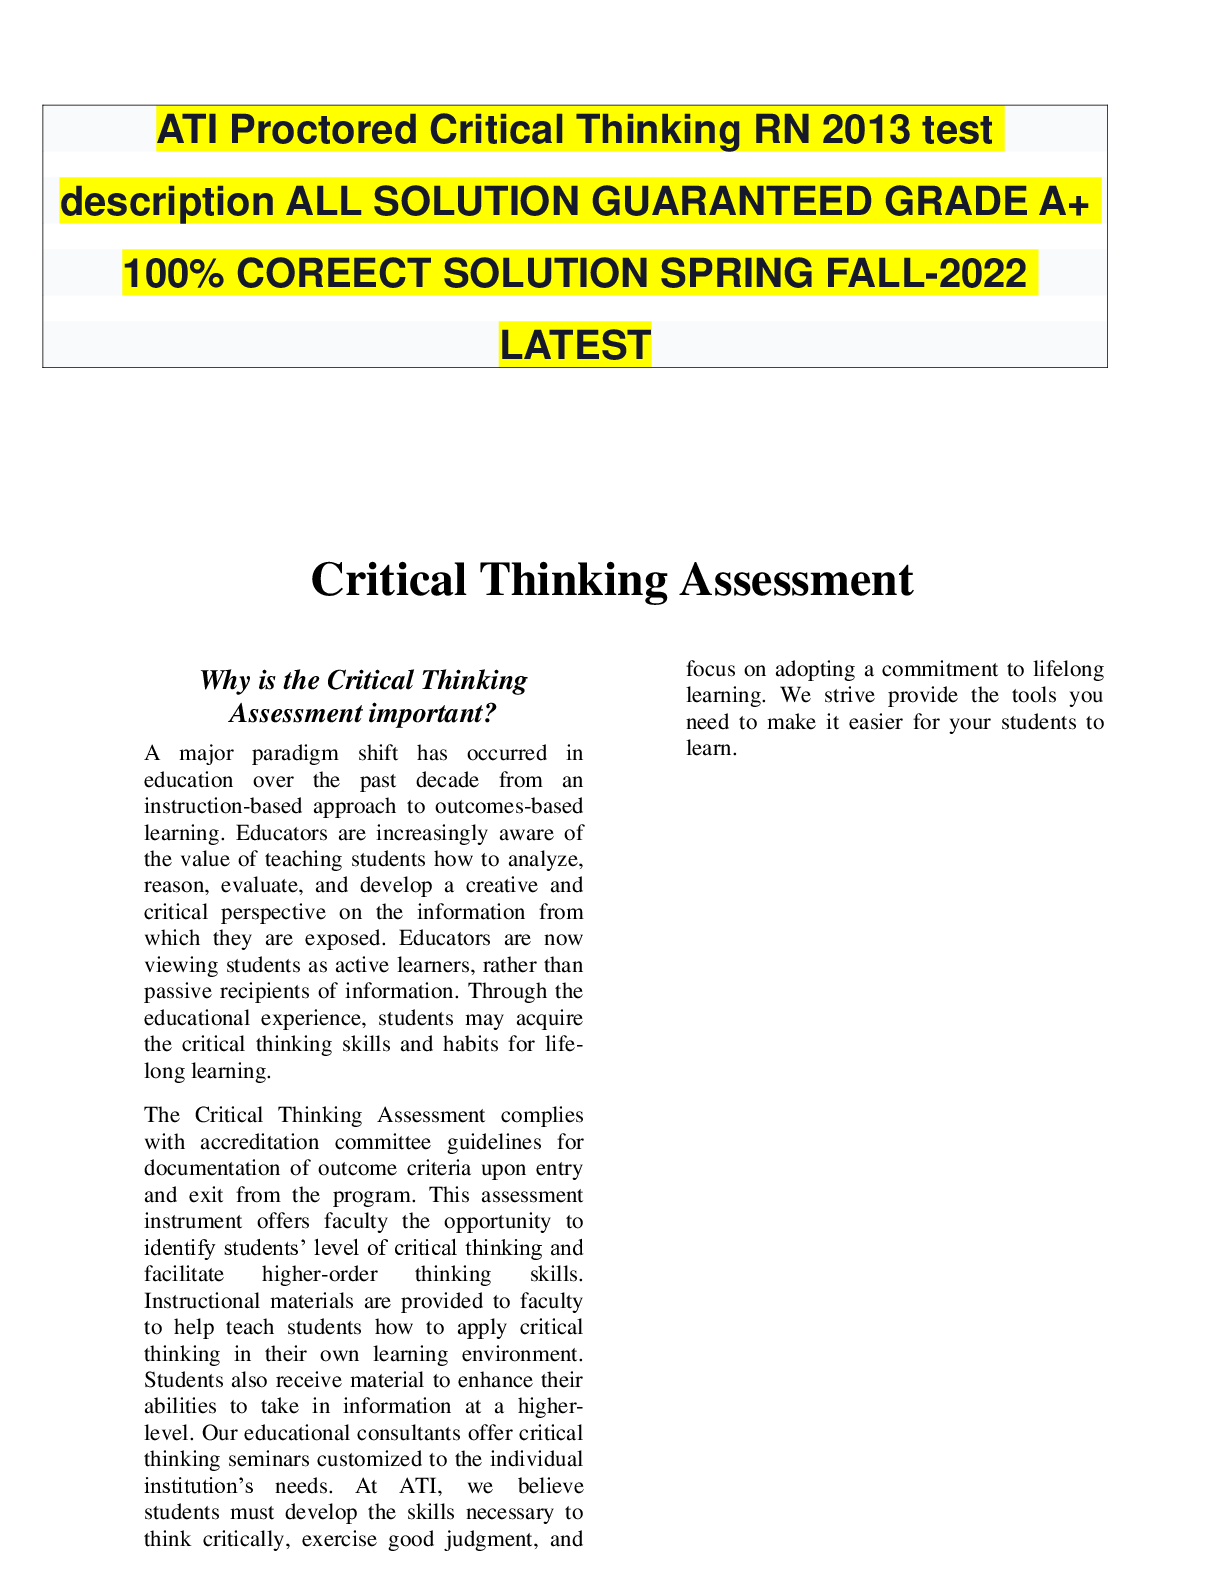 ati critical thinking assessment entrance